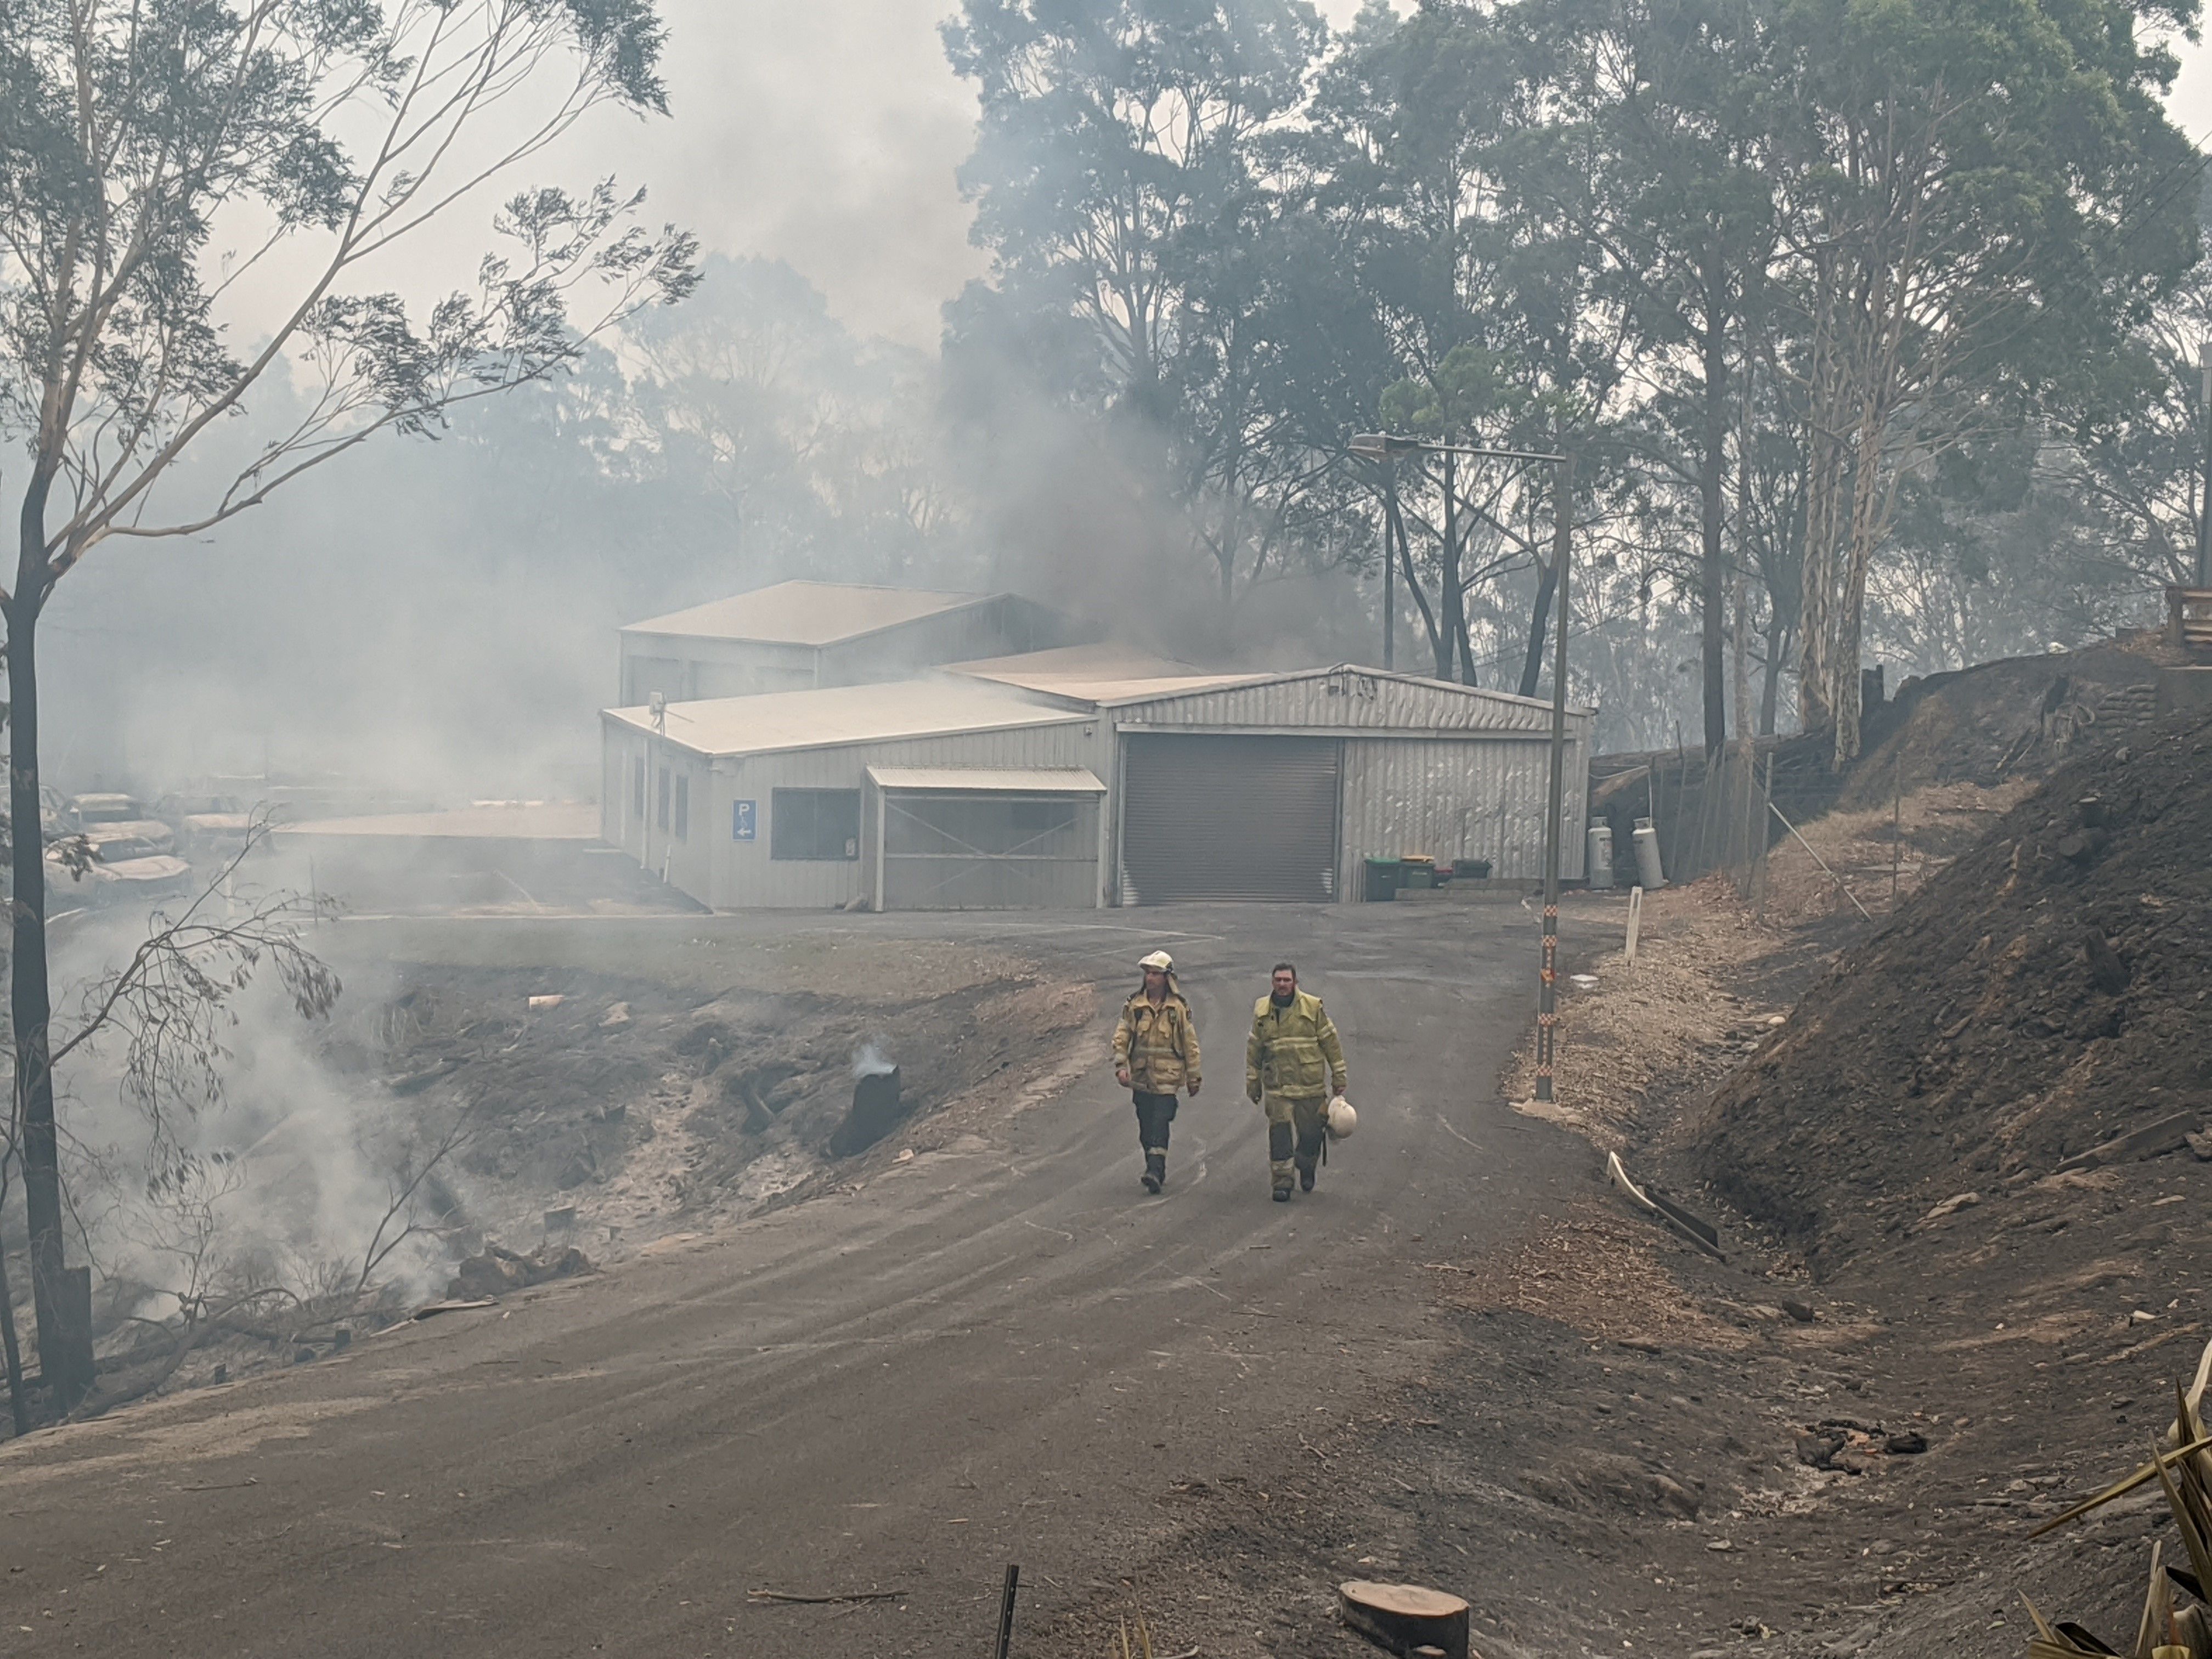 Batemans Bay SES to build new headquarters with fire brigade after old home destroyed in bushfires